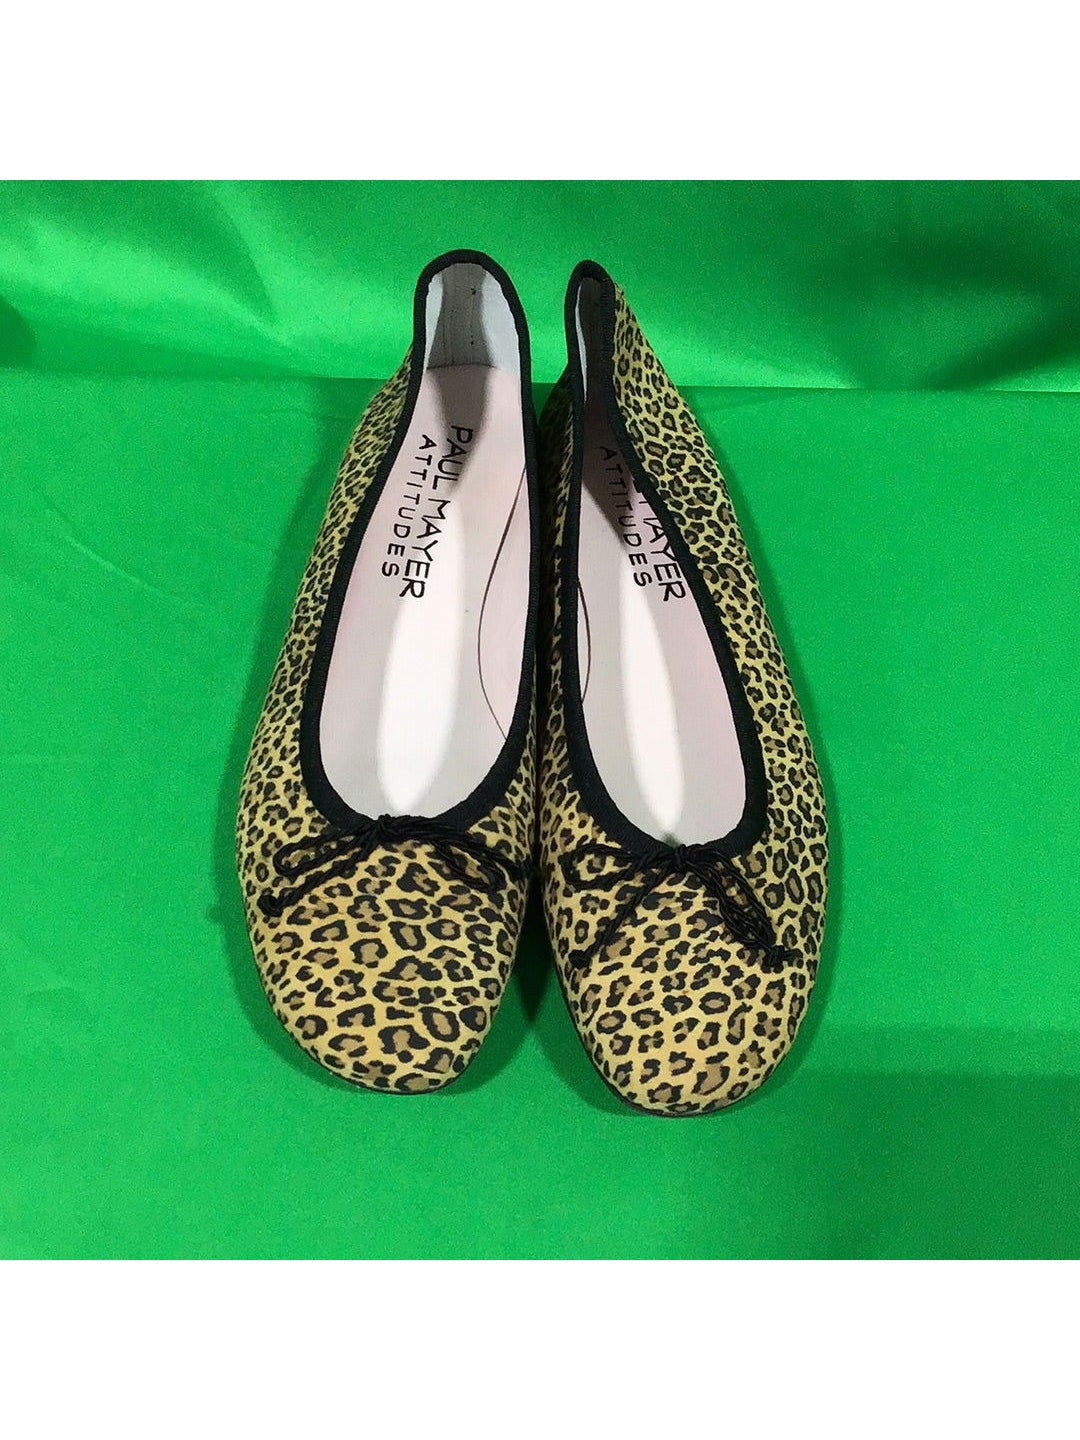 Paul Mayer Attitudes Ladies Ballet Flats Size 10 Brown Cheetah Print - In Box - The Kennedy Collective Thrift - 